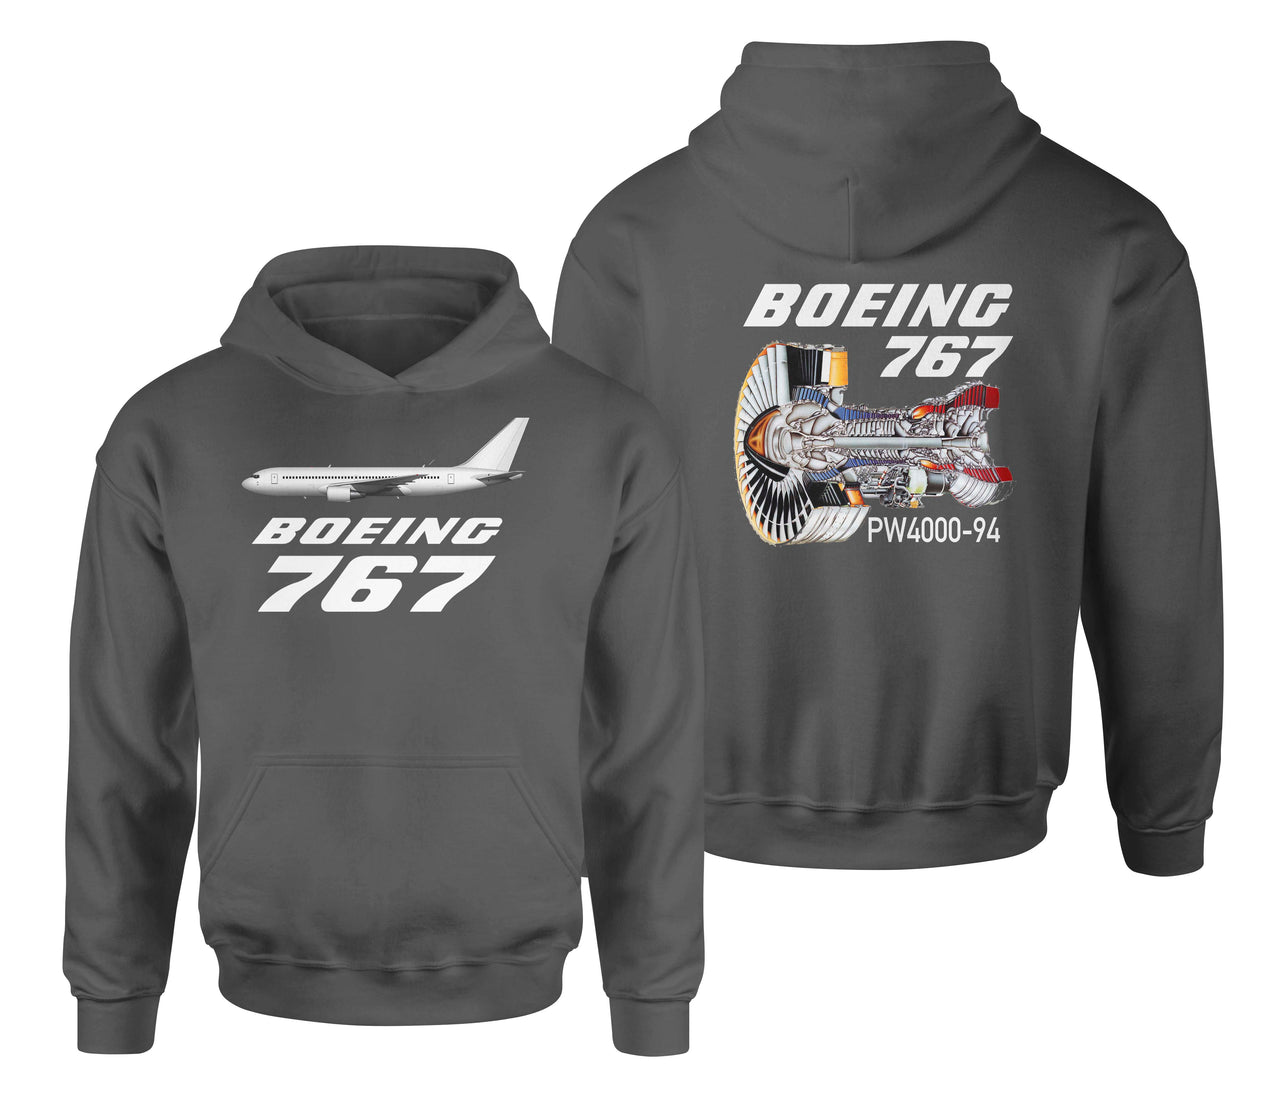 Boeing 767 Engine (PW4000-94) Designed Double Side Hoodies